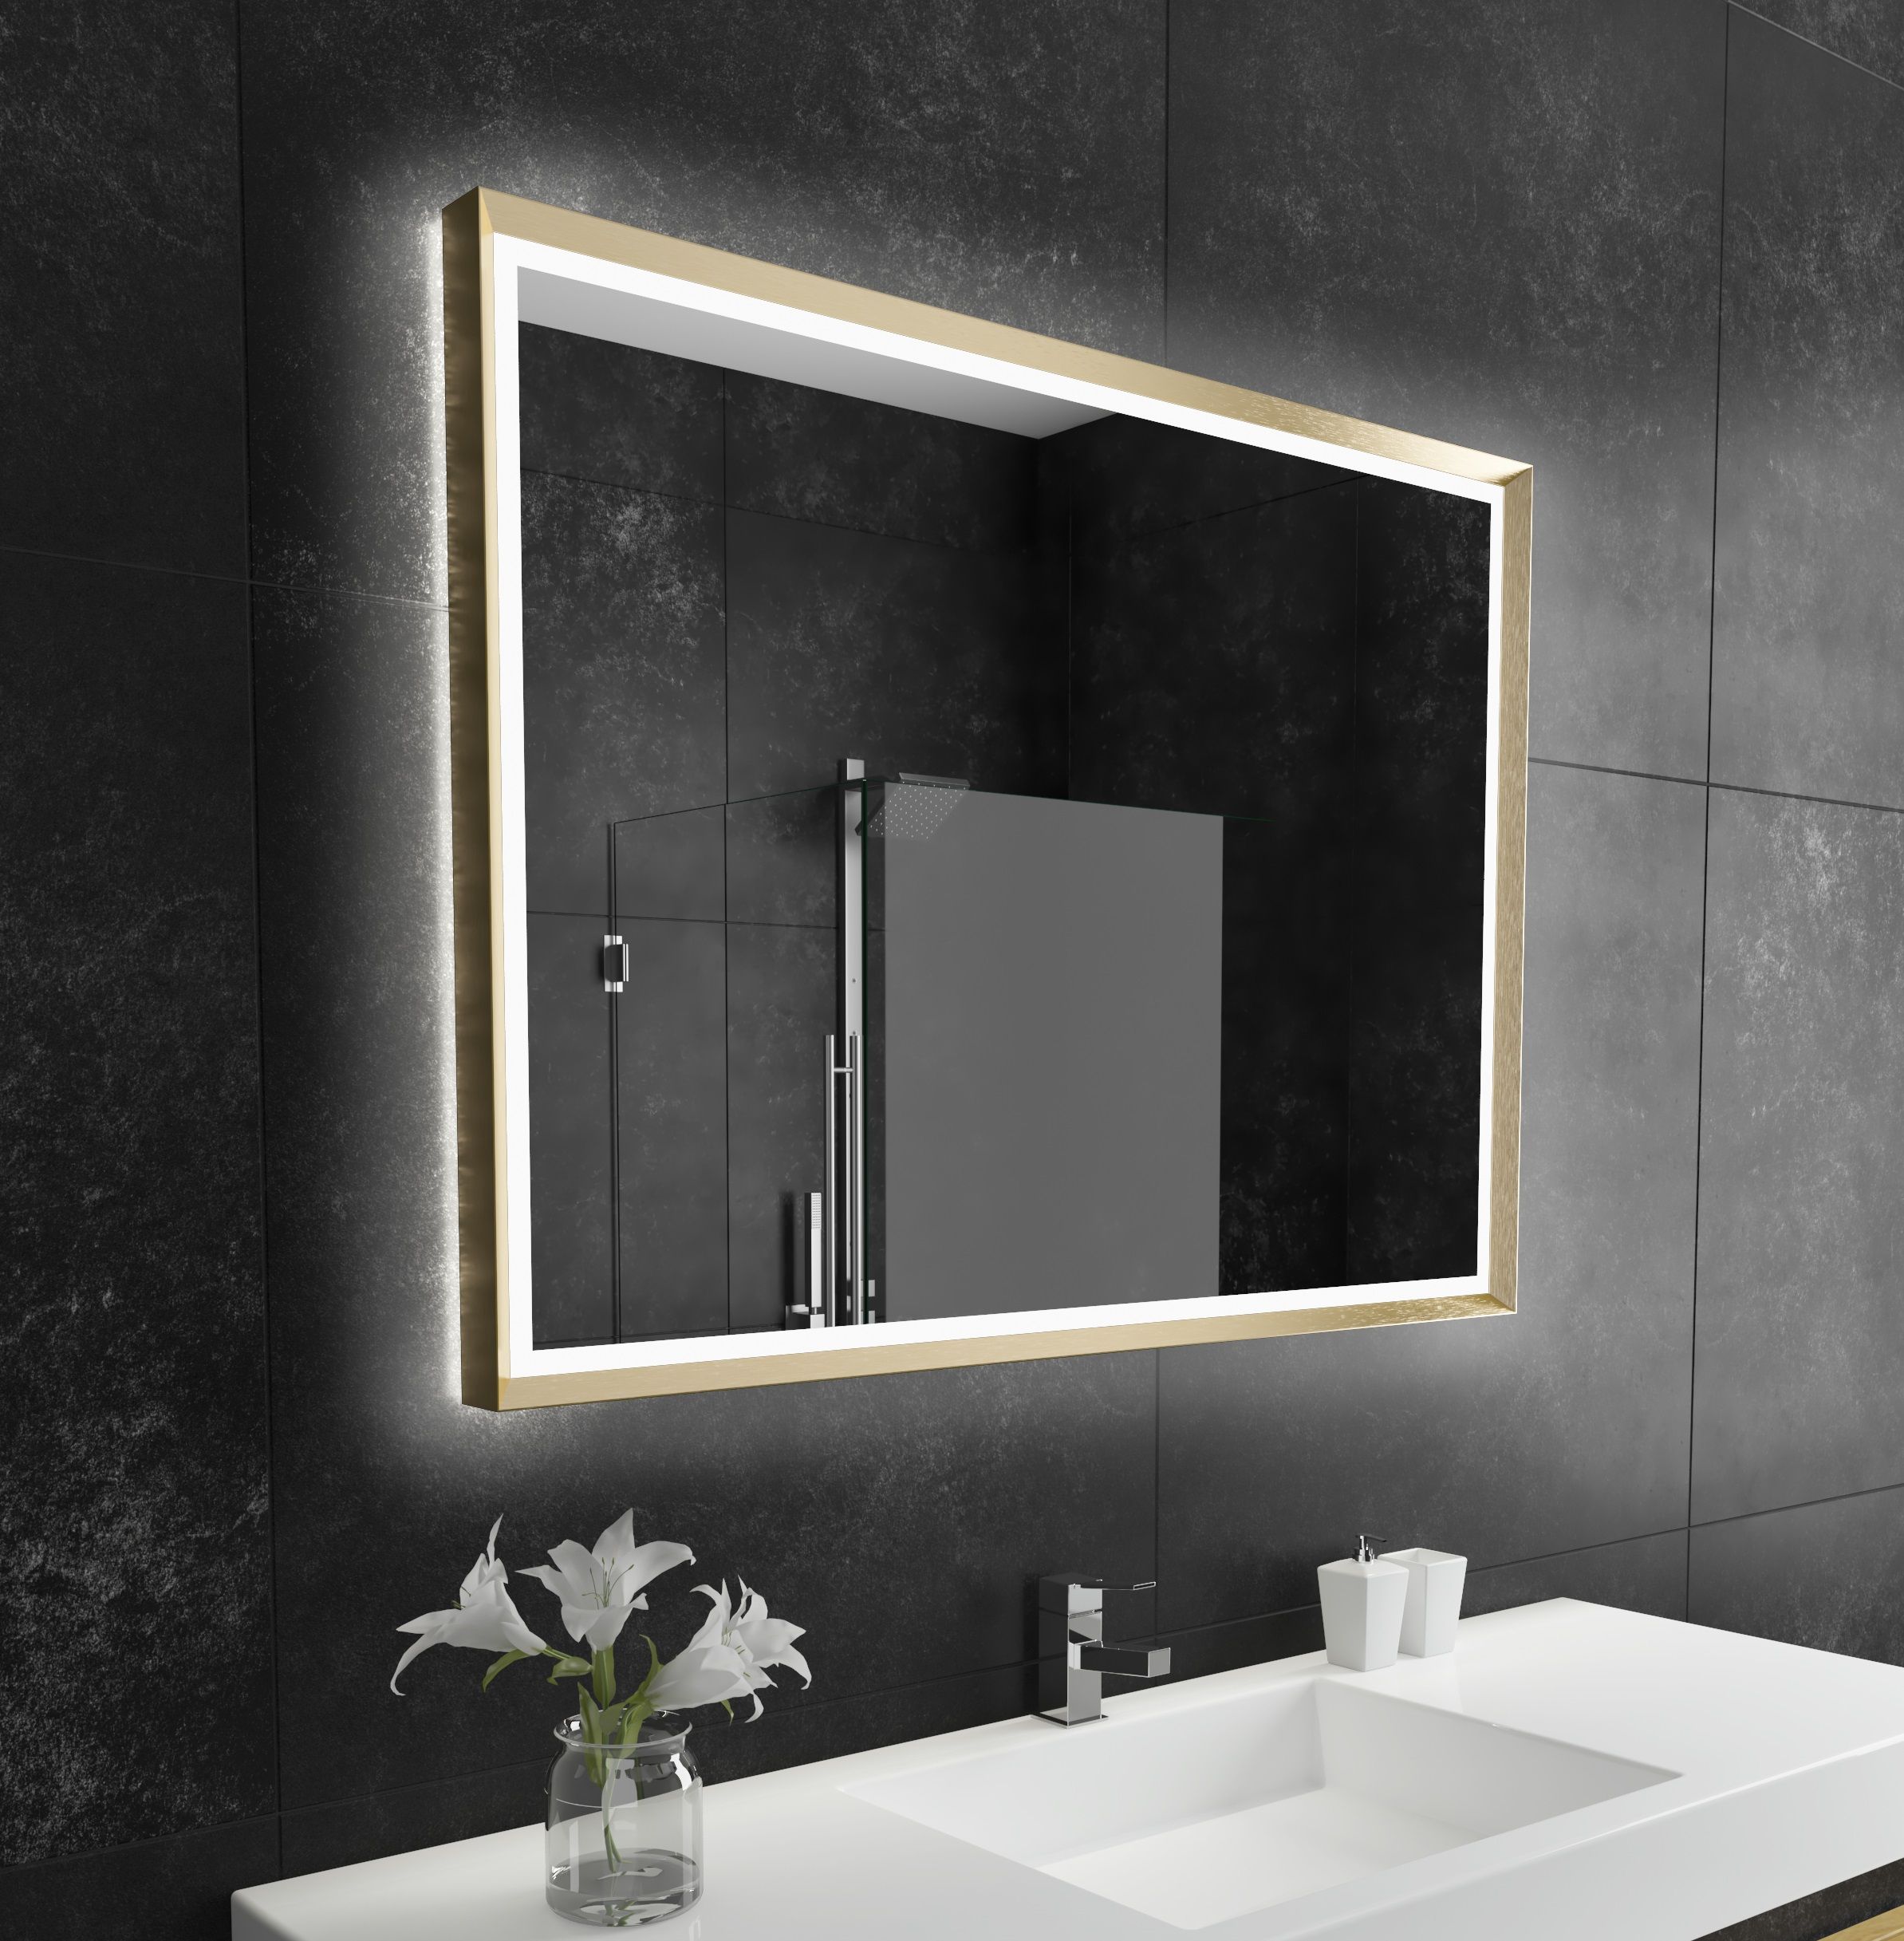 Backlit Mirror Opera 48 X 35 Gold Inside Edge Lit Square Led Wall Mirrors (View 1 of 15)